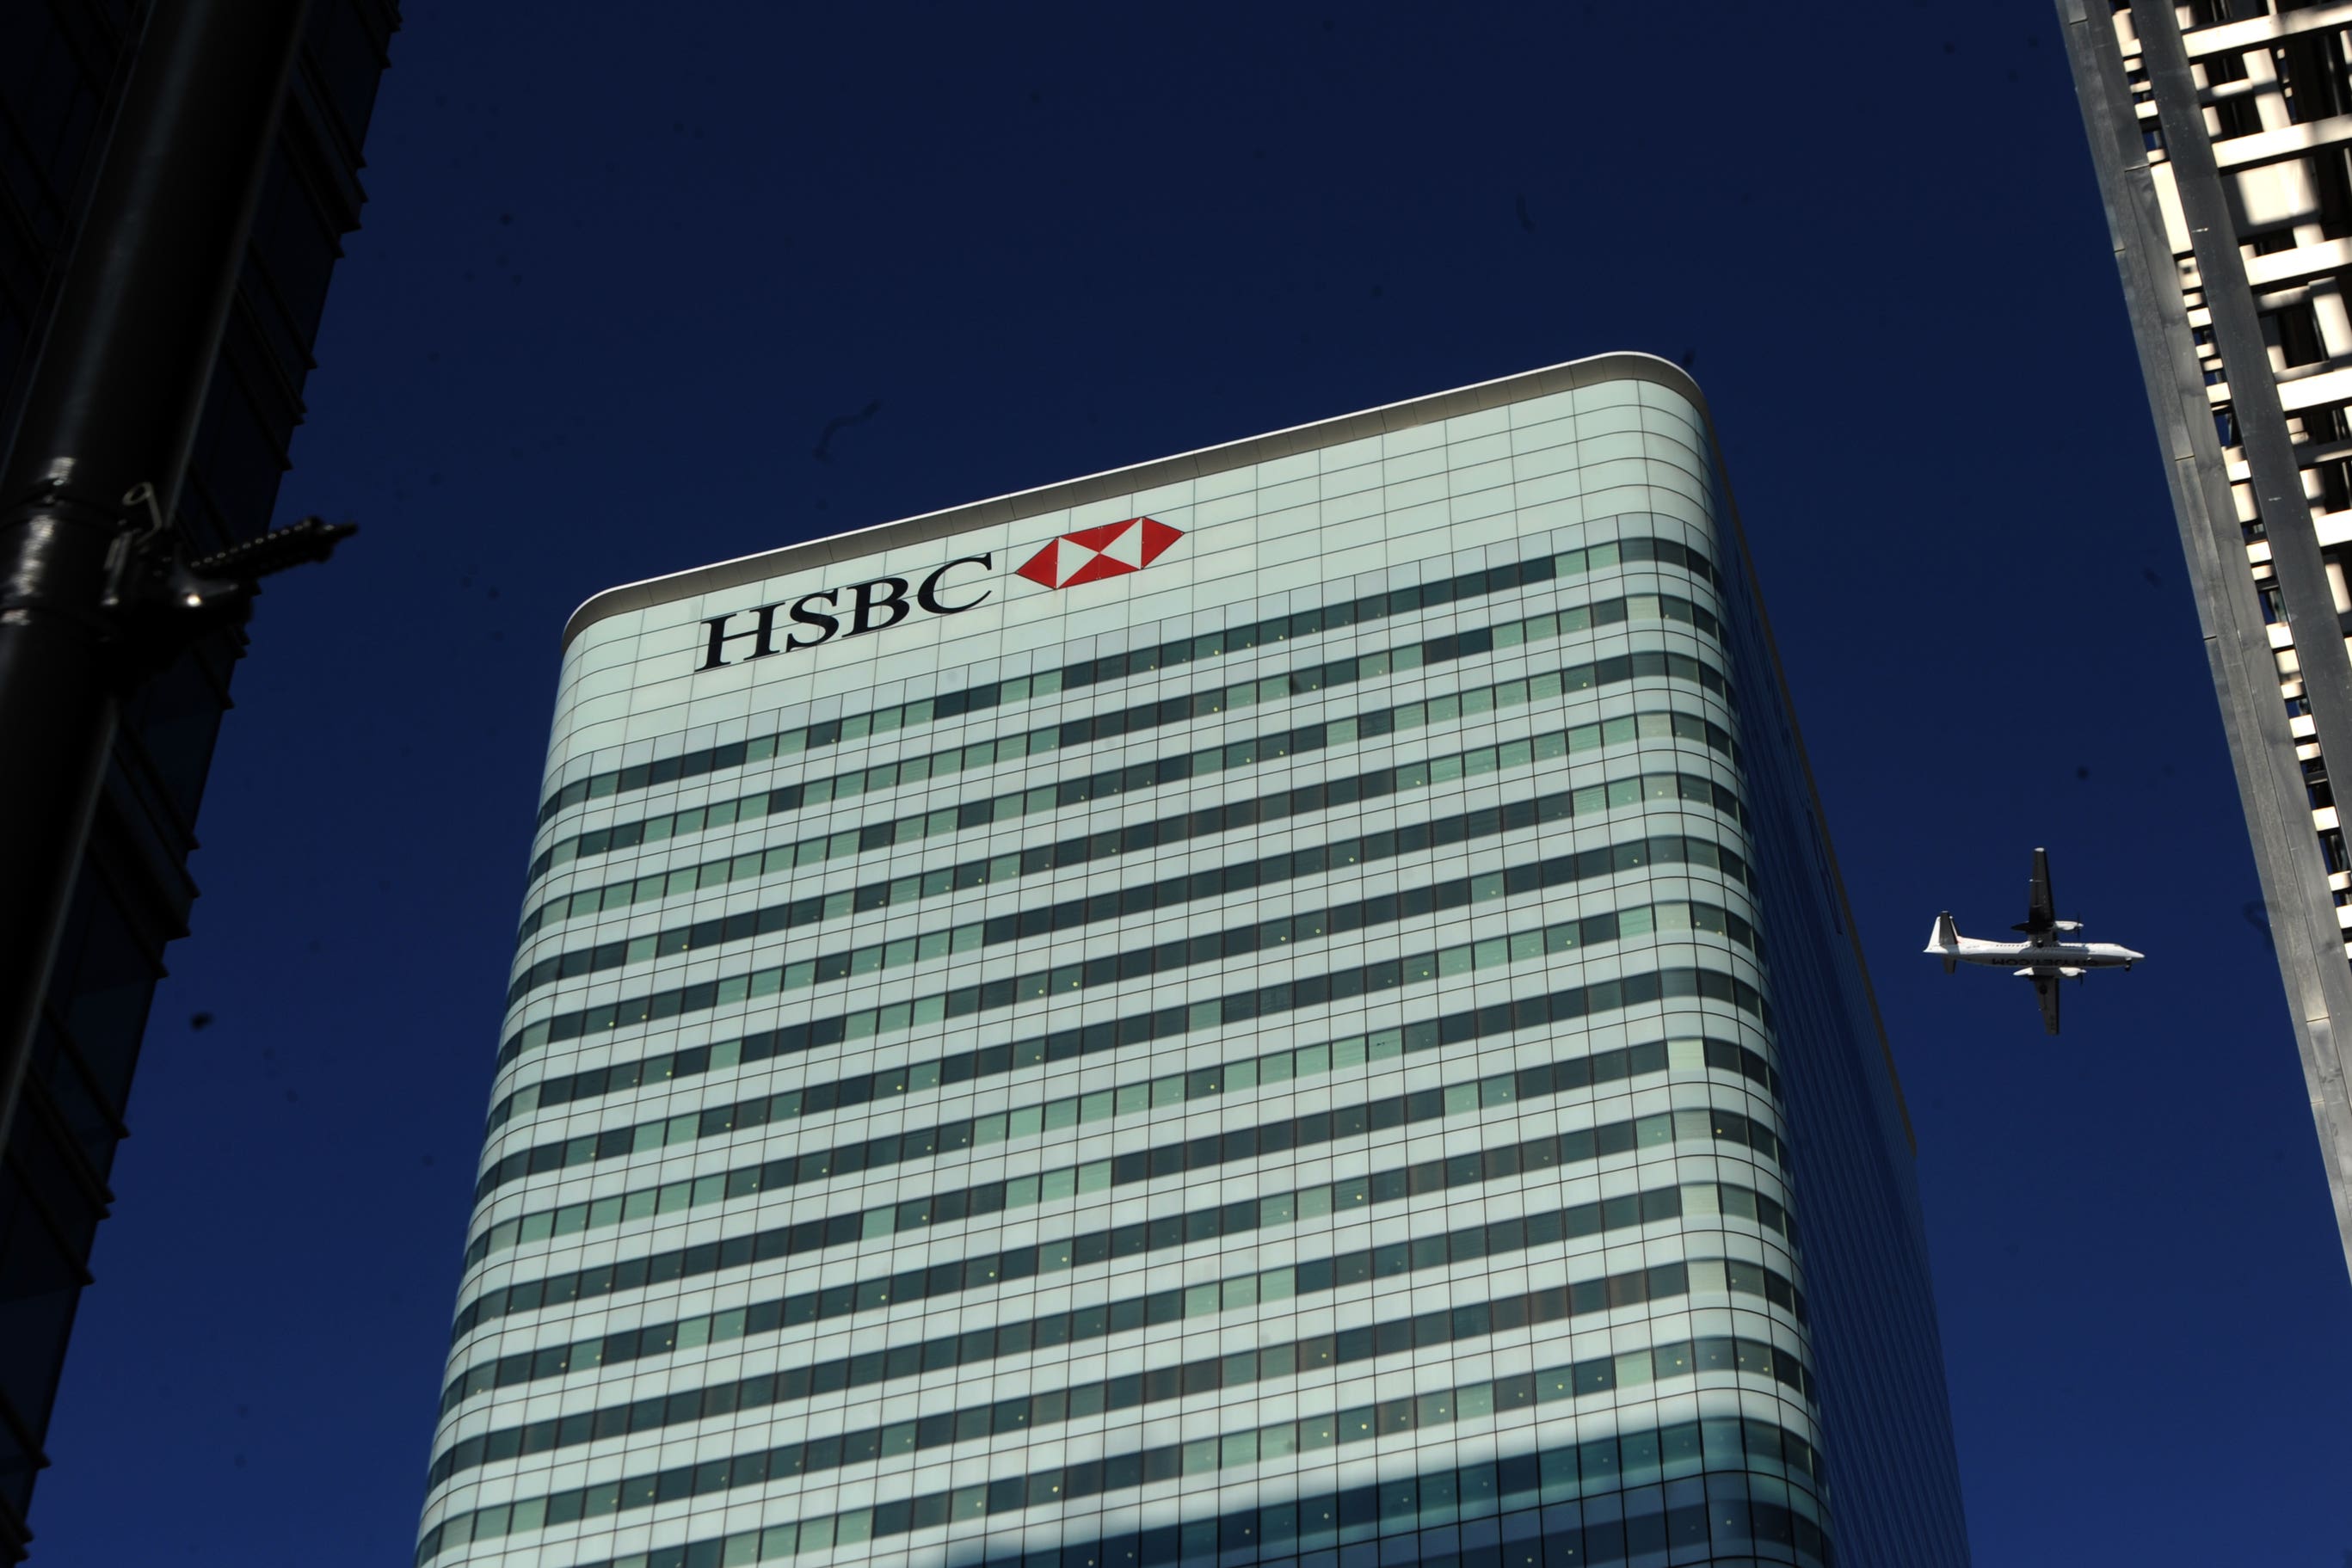 Hsbc To Leave Canary Wharf Tower By 2027 The Independent 8236